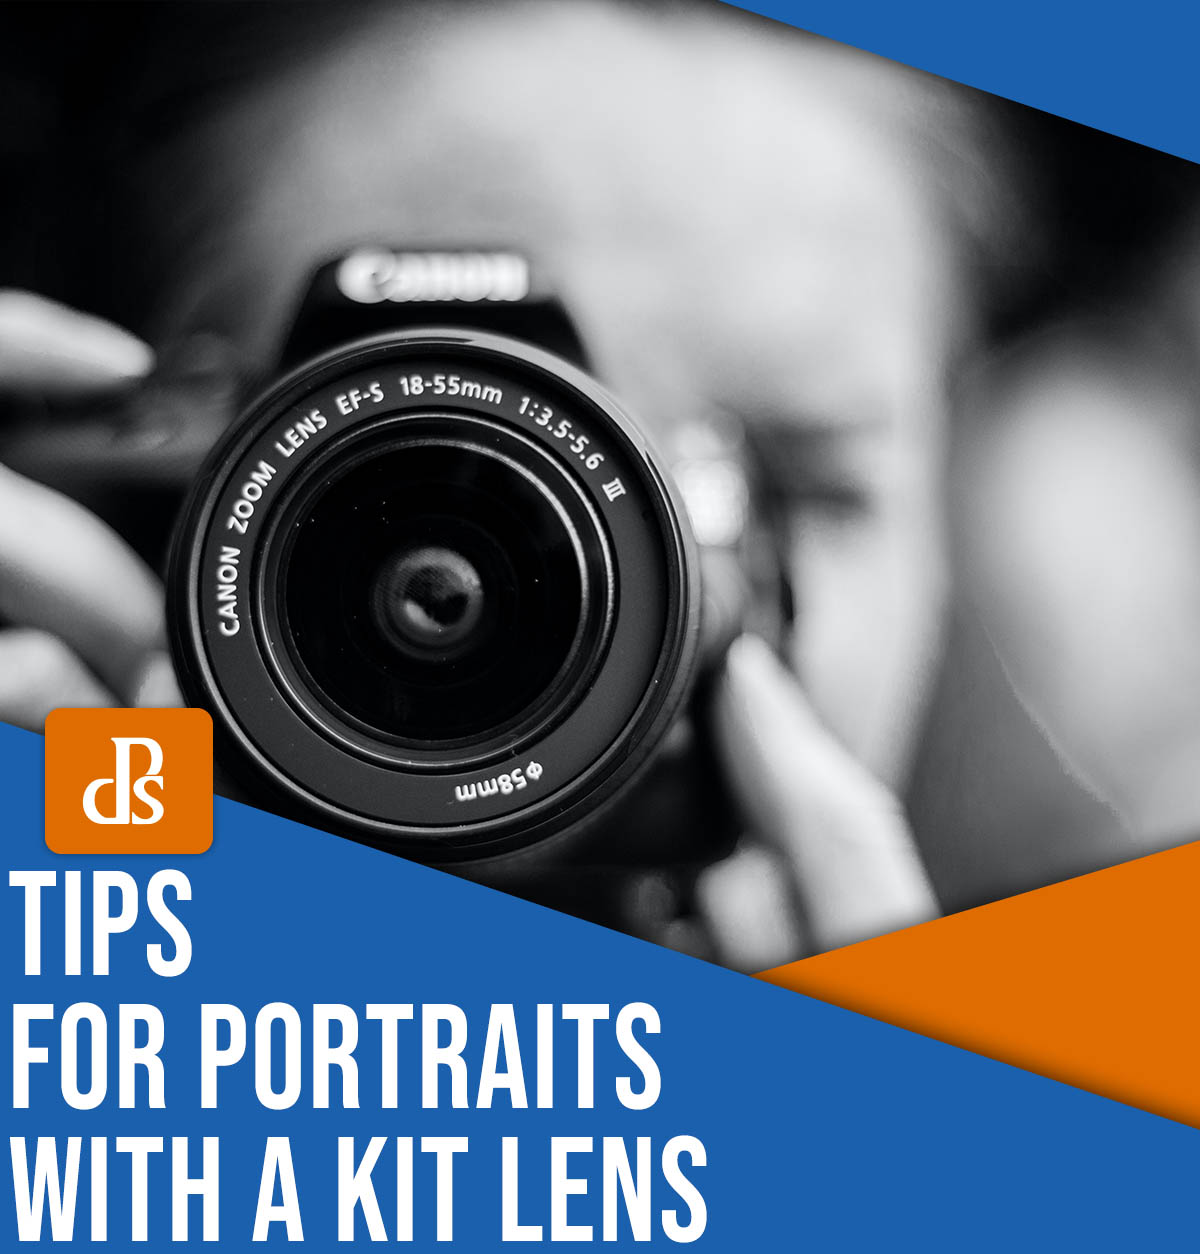 Tips for portraits with a kit lens